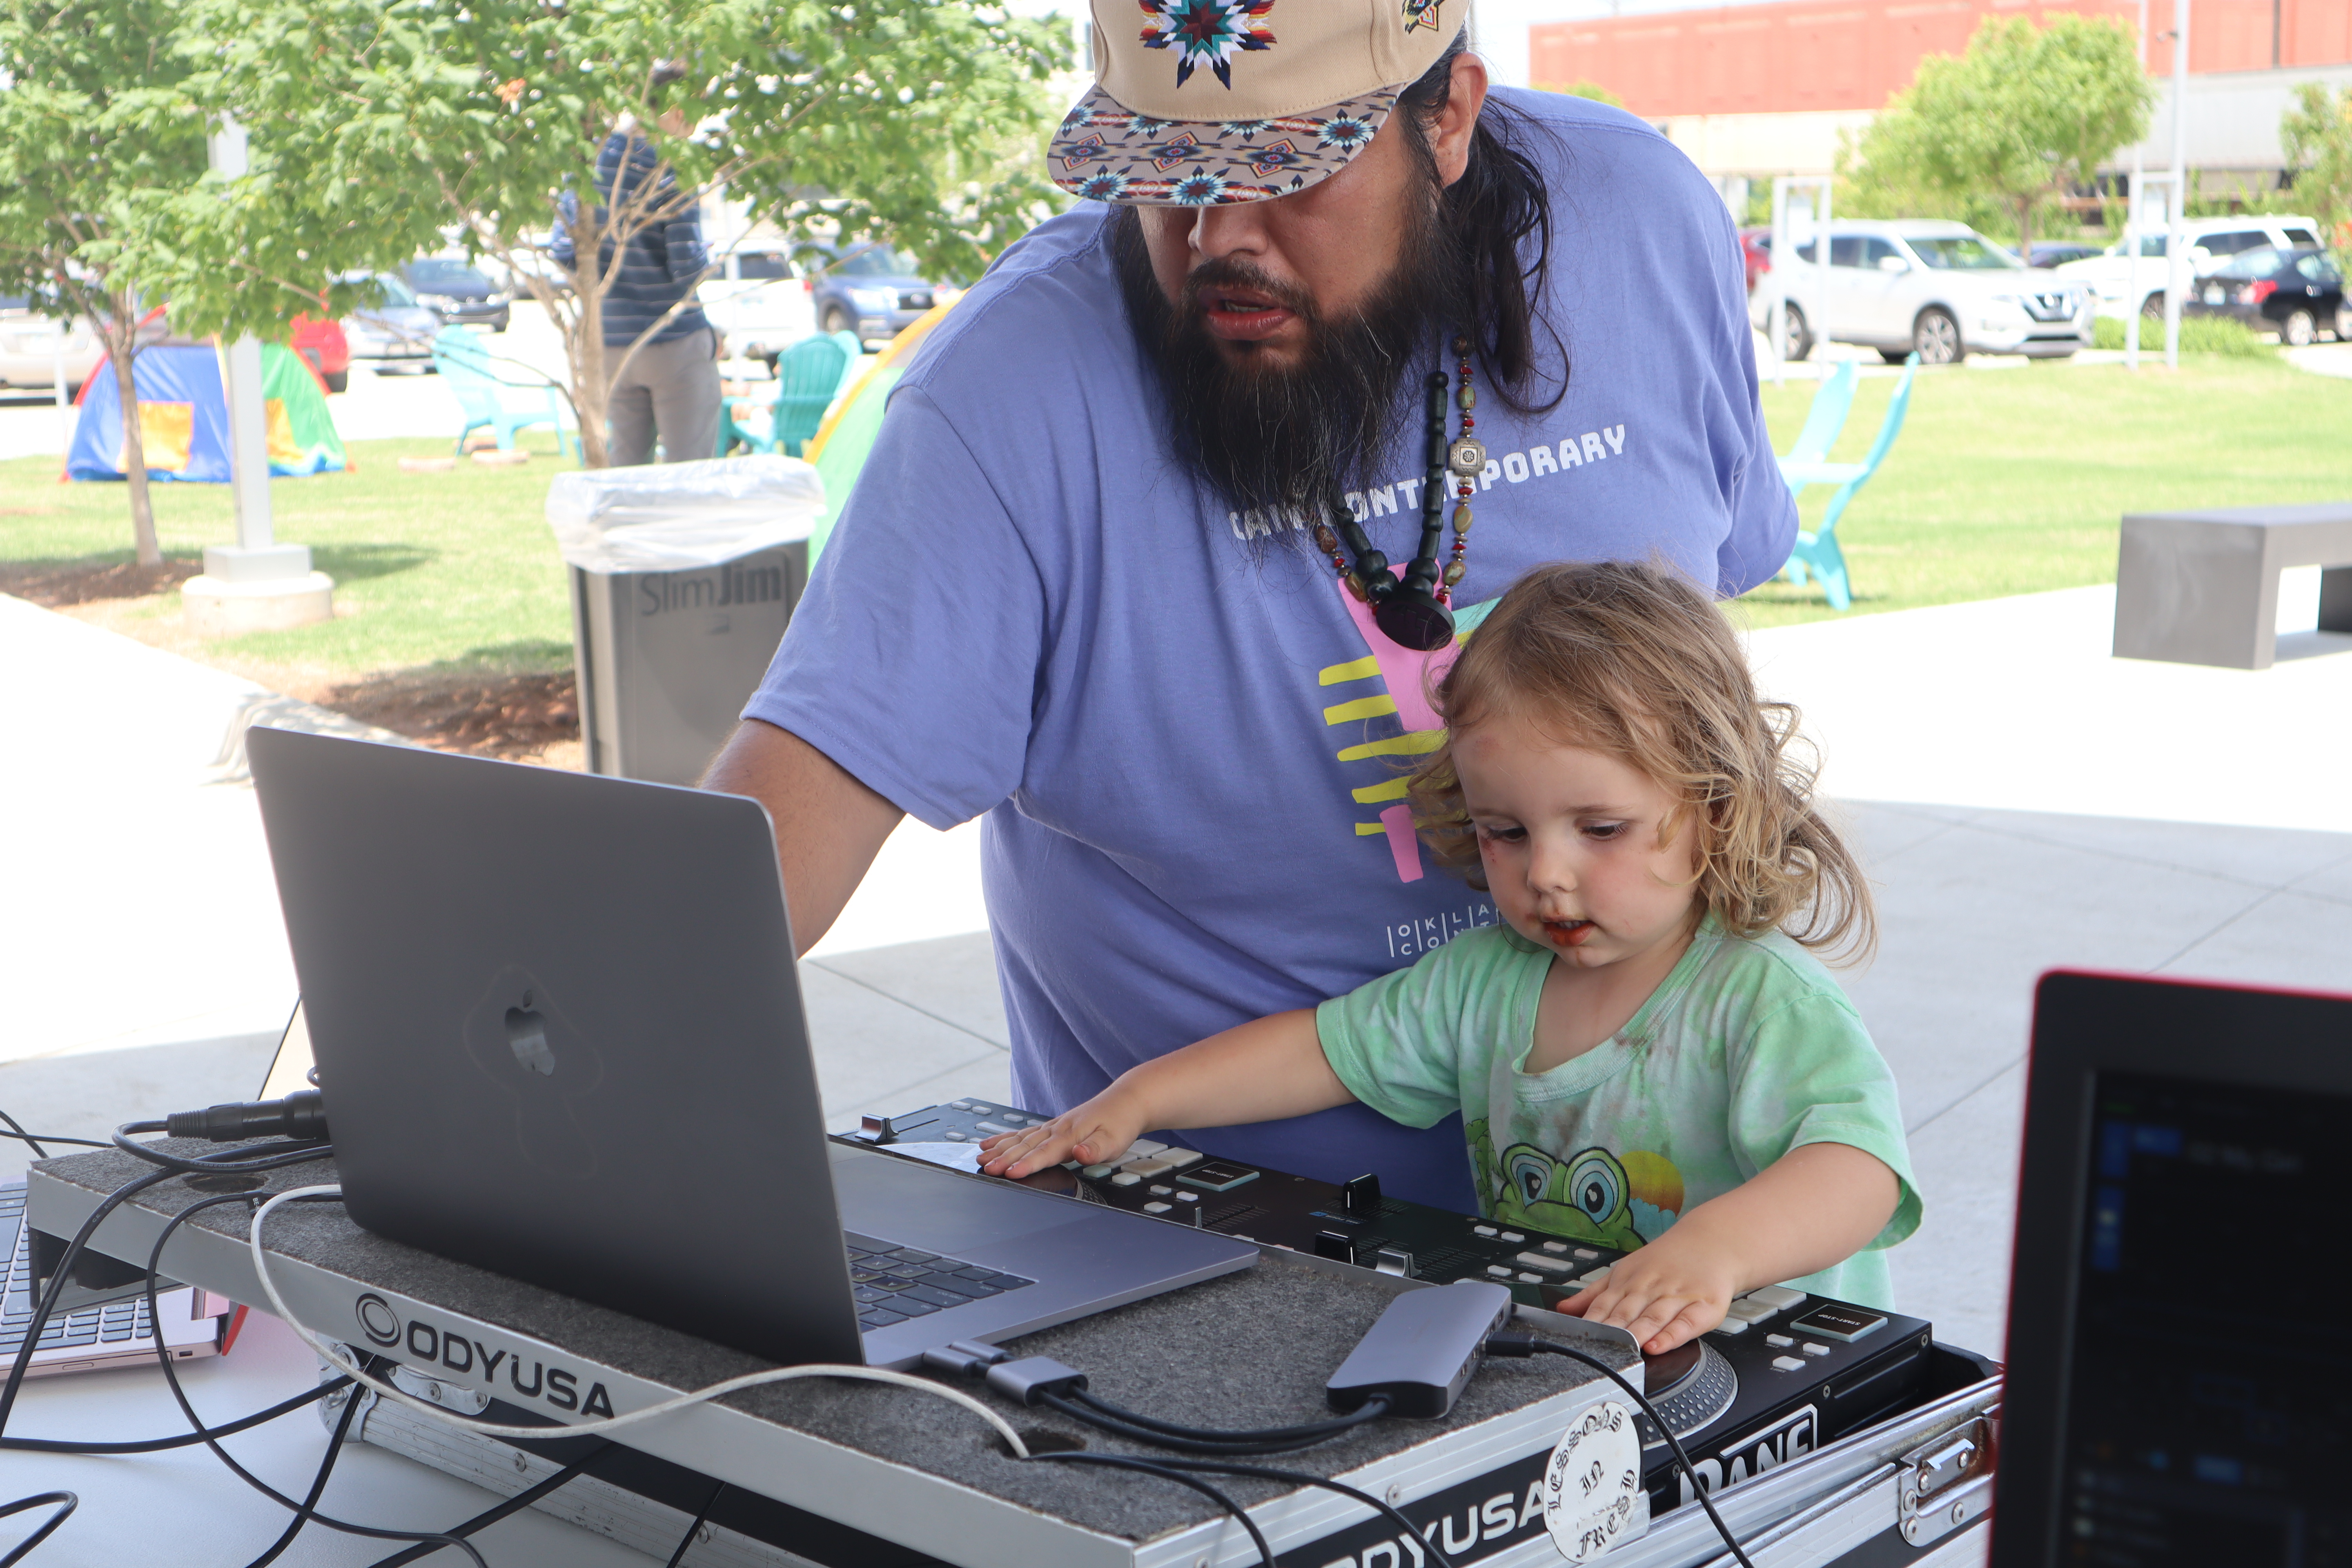 A bearded man in a baseball cap helps a young child operate a turntable